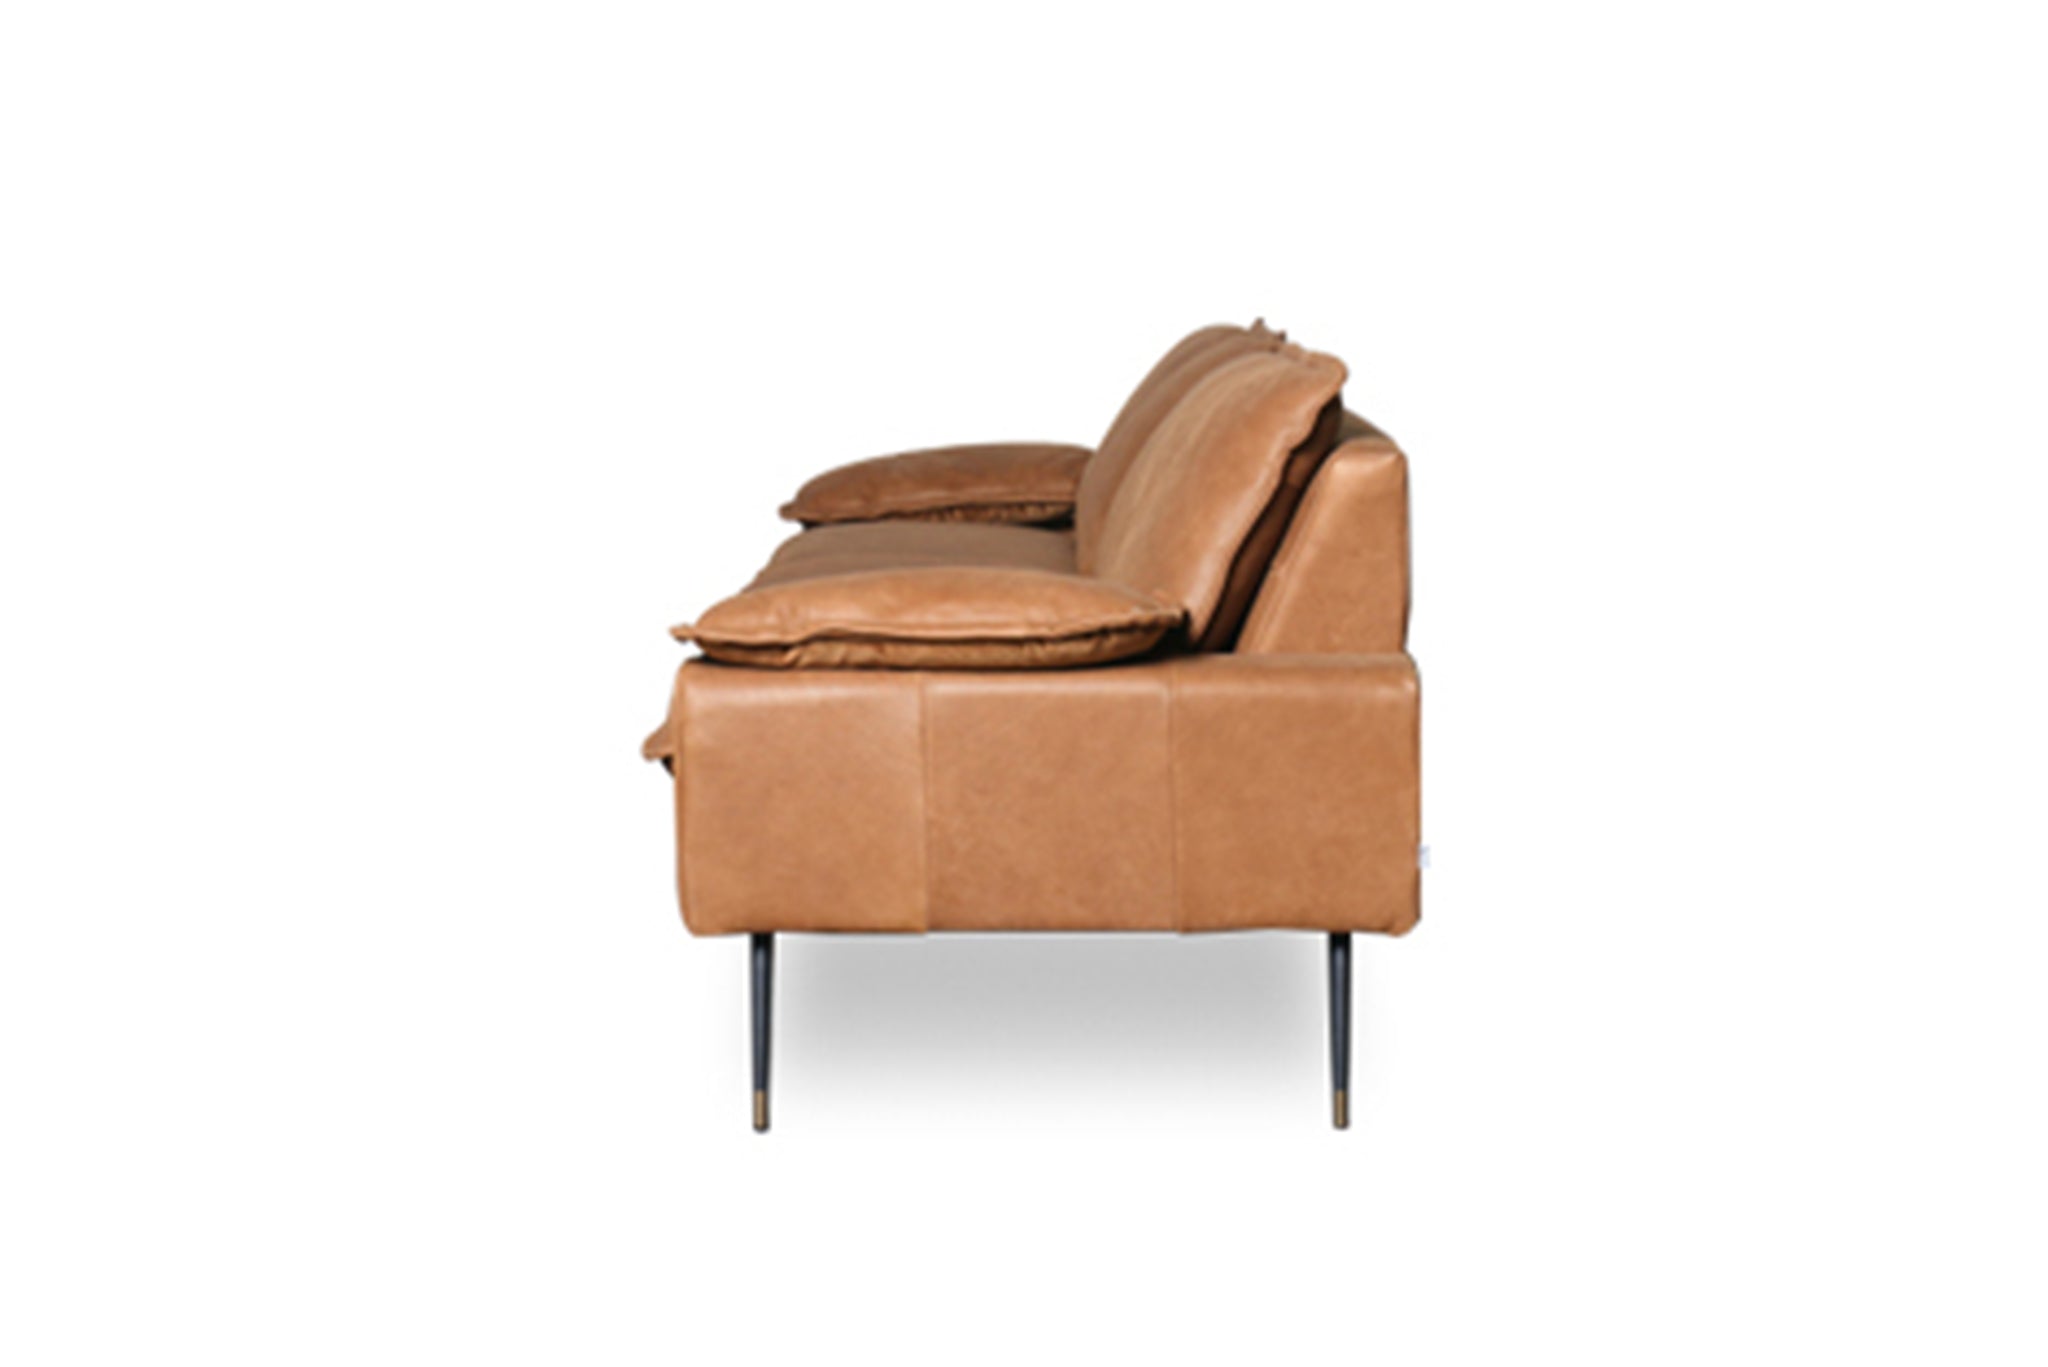 Marvin 3 Seater Leather Sofa